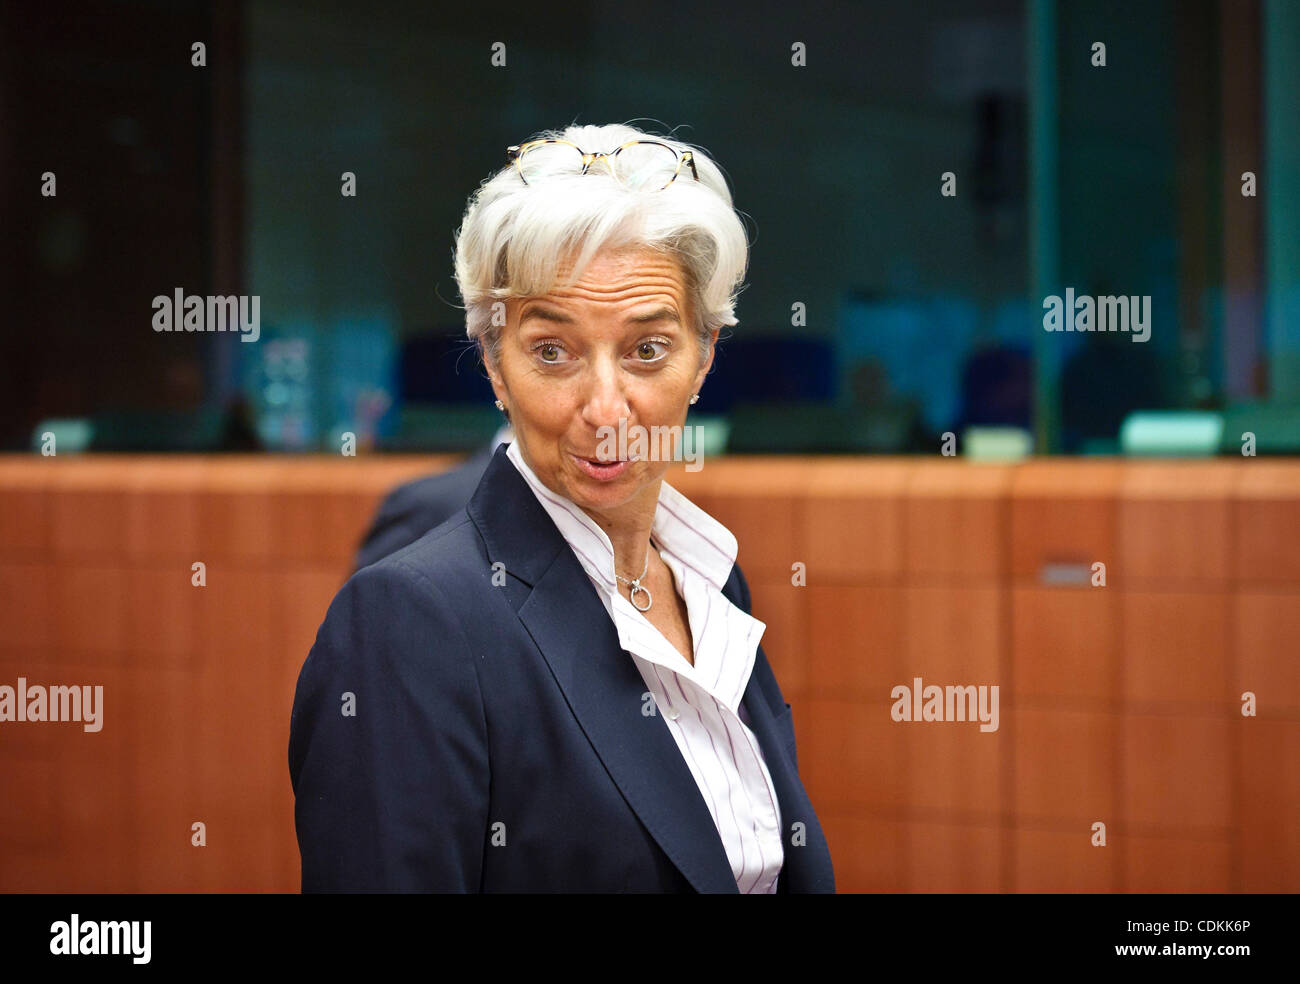 Mar. 21, 2011 - Brussels, BXL, Belgium - French Finance Minister Christine Lagarde  before a ministerial meeting on European Stability Mecanism at EU headquarters in Brussels  in  Brussels, Belgium on 2011-03-21 The extraordinary meeting of finance ministers of the eurozone will finalize discussions Stock Photo